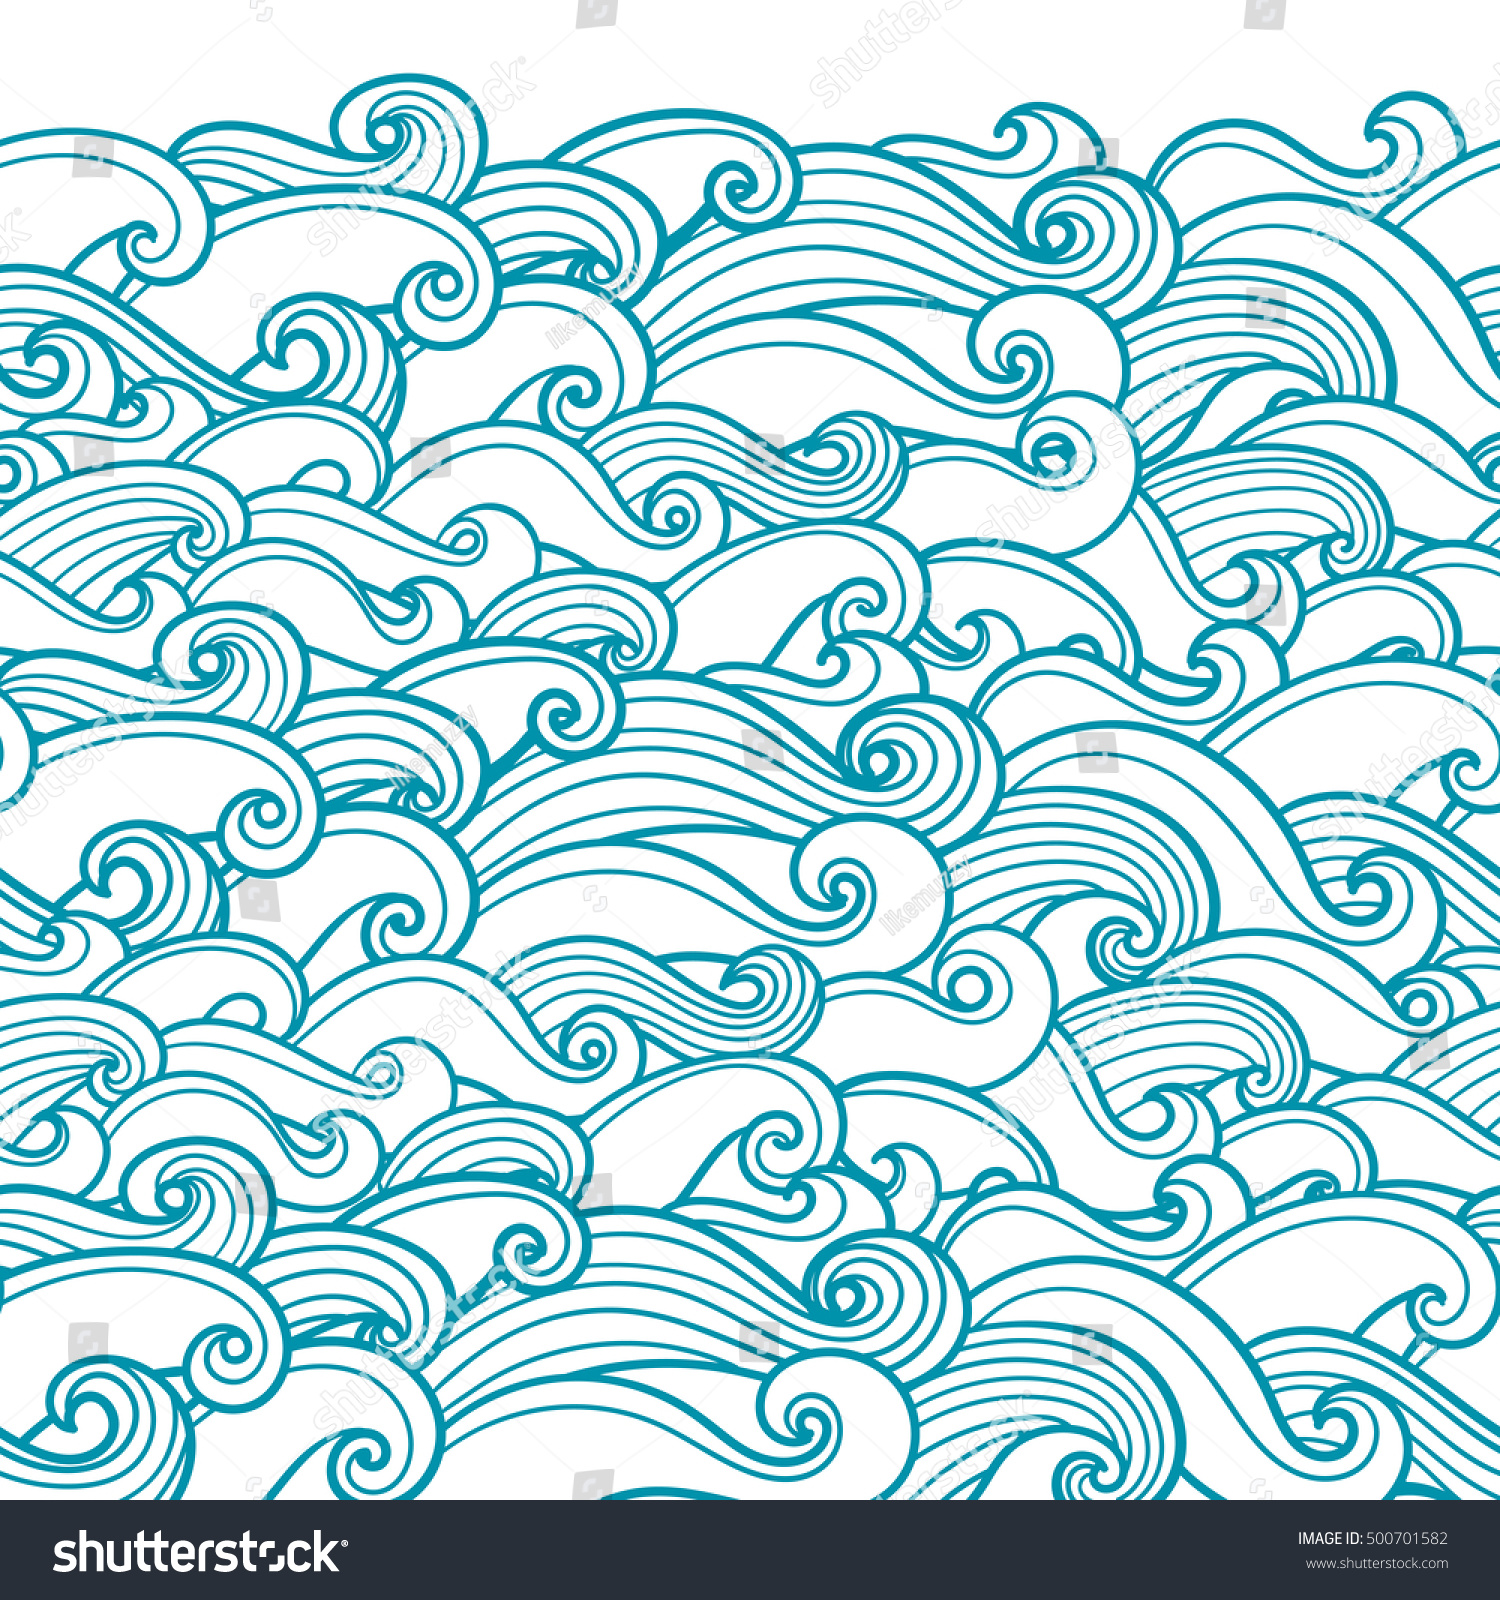 23,391 Wave like pattern Images, Stock Photos & Vectors | Shutterstock